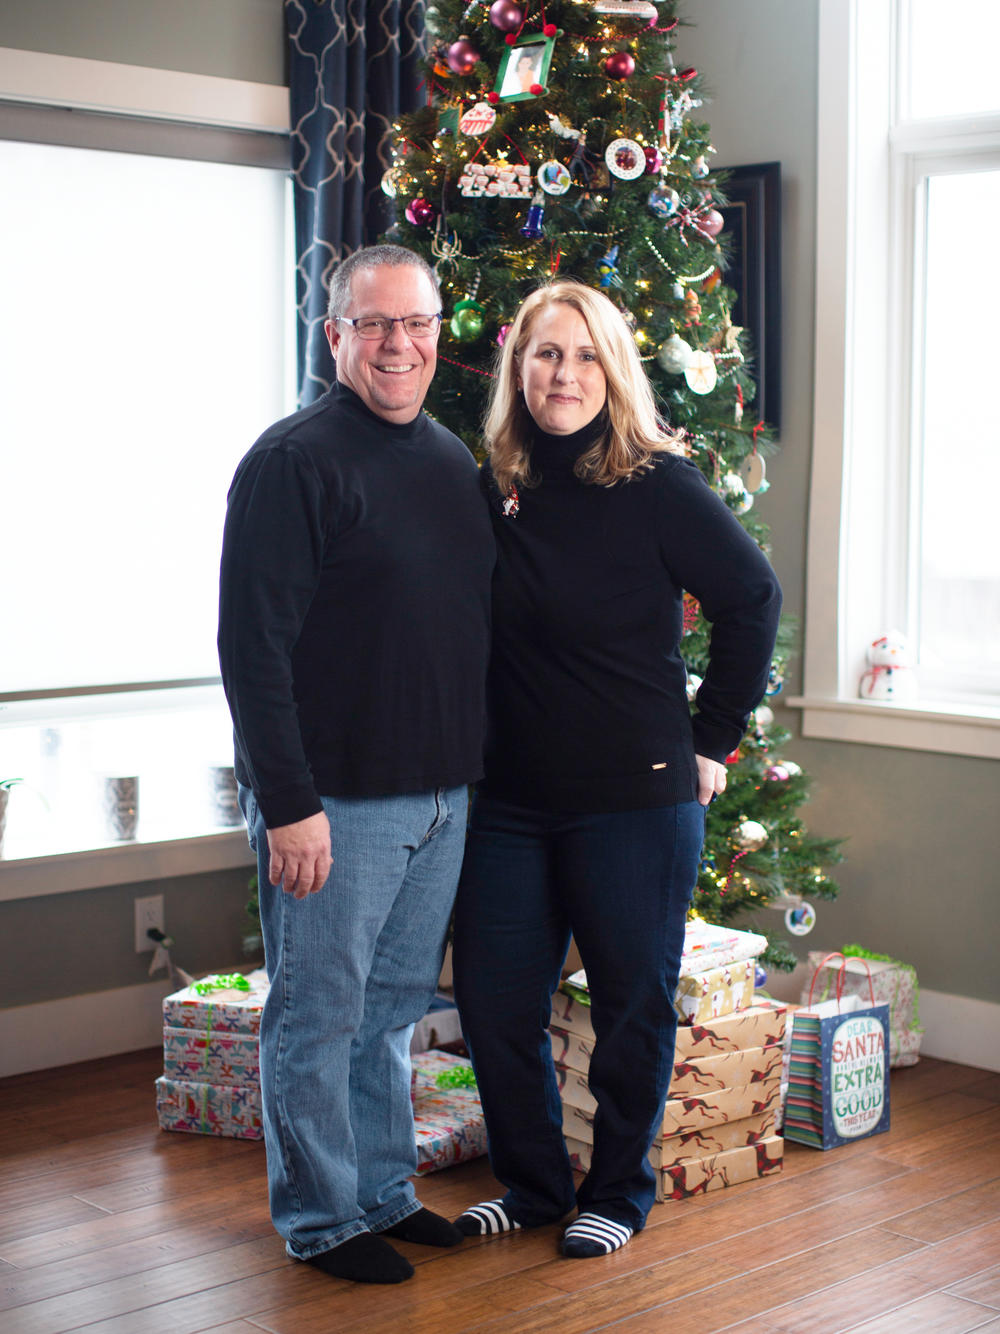 Jennifer Kelly-Rogers with her husband, Doug Rogers, in December 2021.